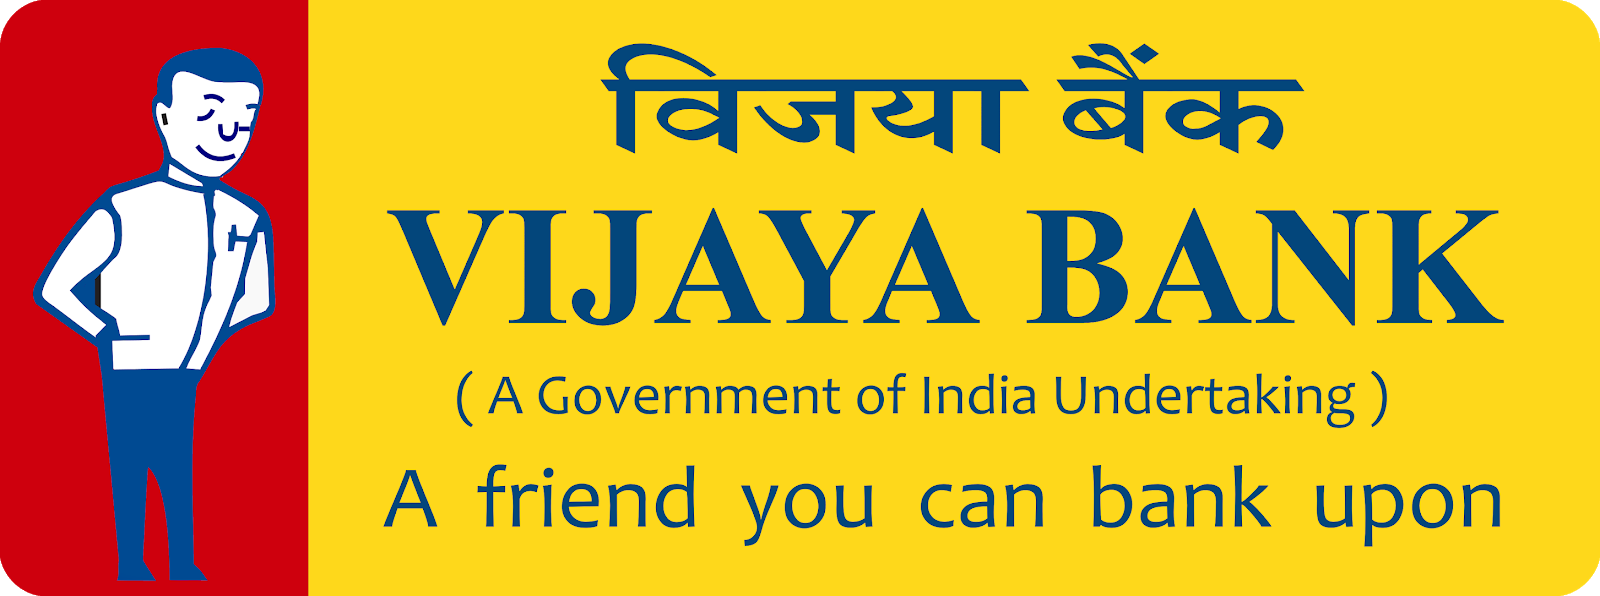 Vijaya Bank Credit Officers Recruitment 2018: Check Detailed Notification and Apply Online |_2.1